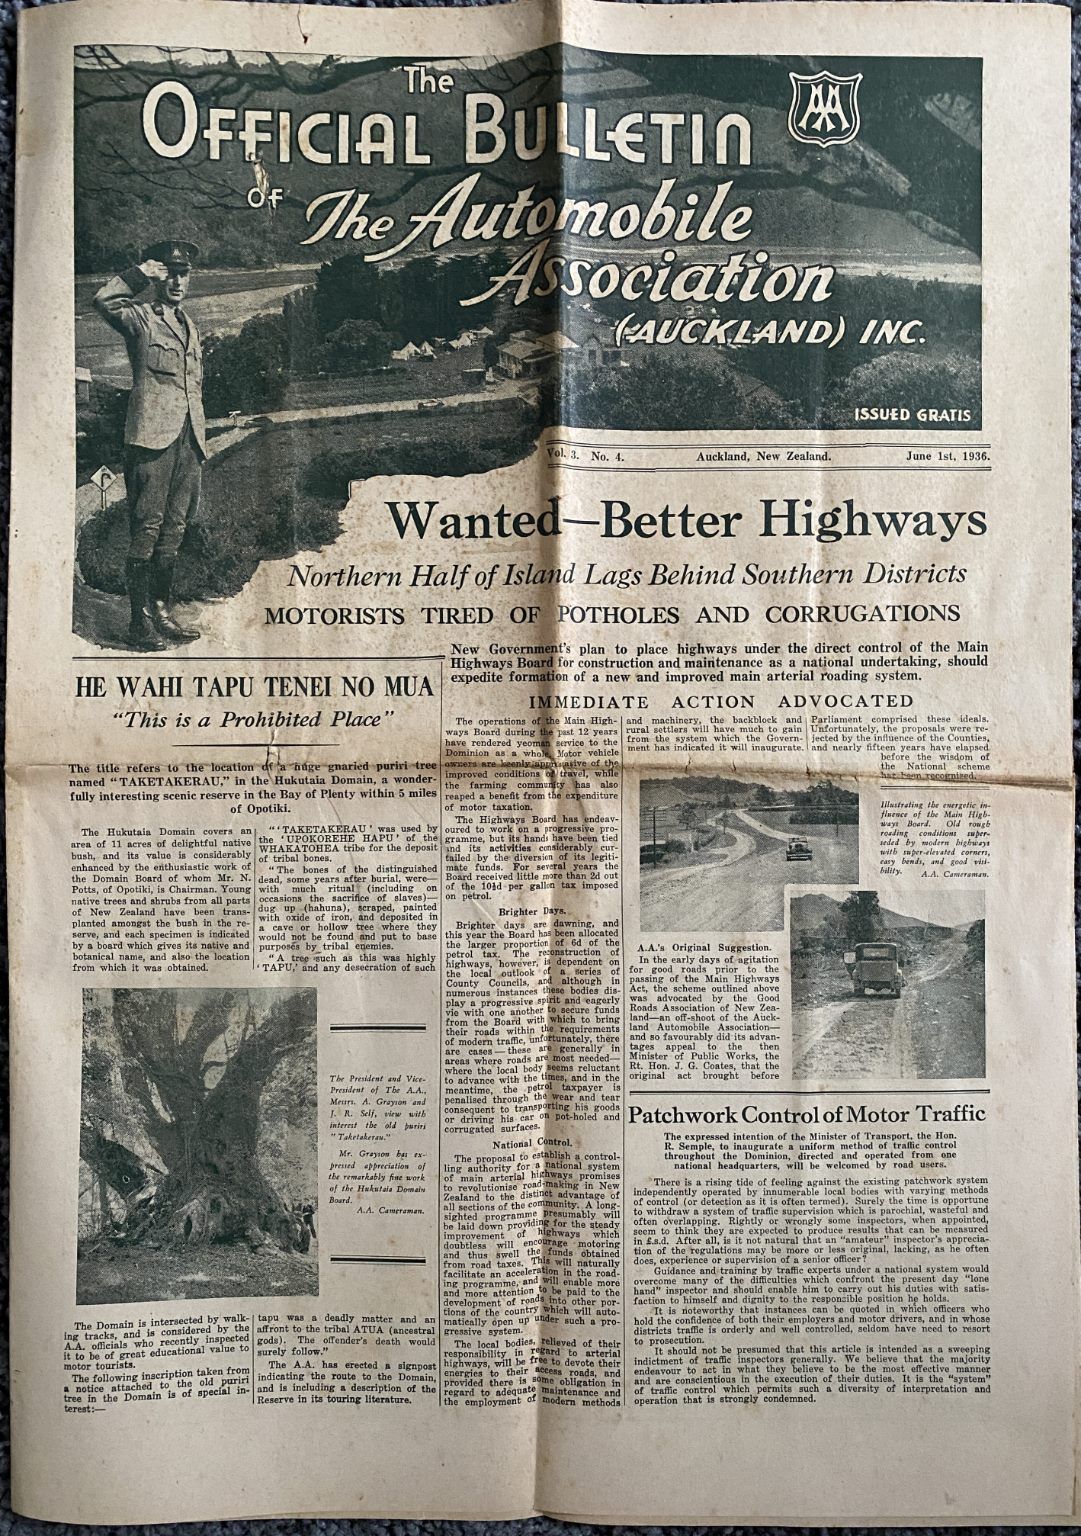 OLD NEWSPAPER: The Official Bulletin of the Automobile Association (Auck) 1936